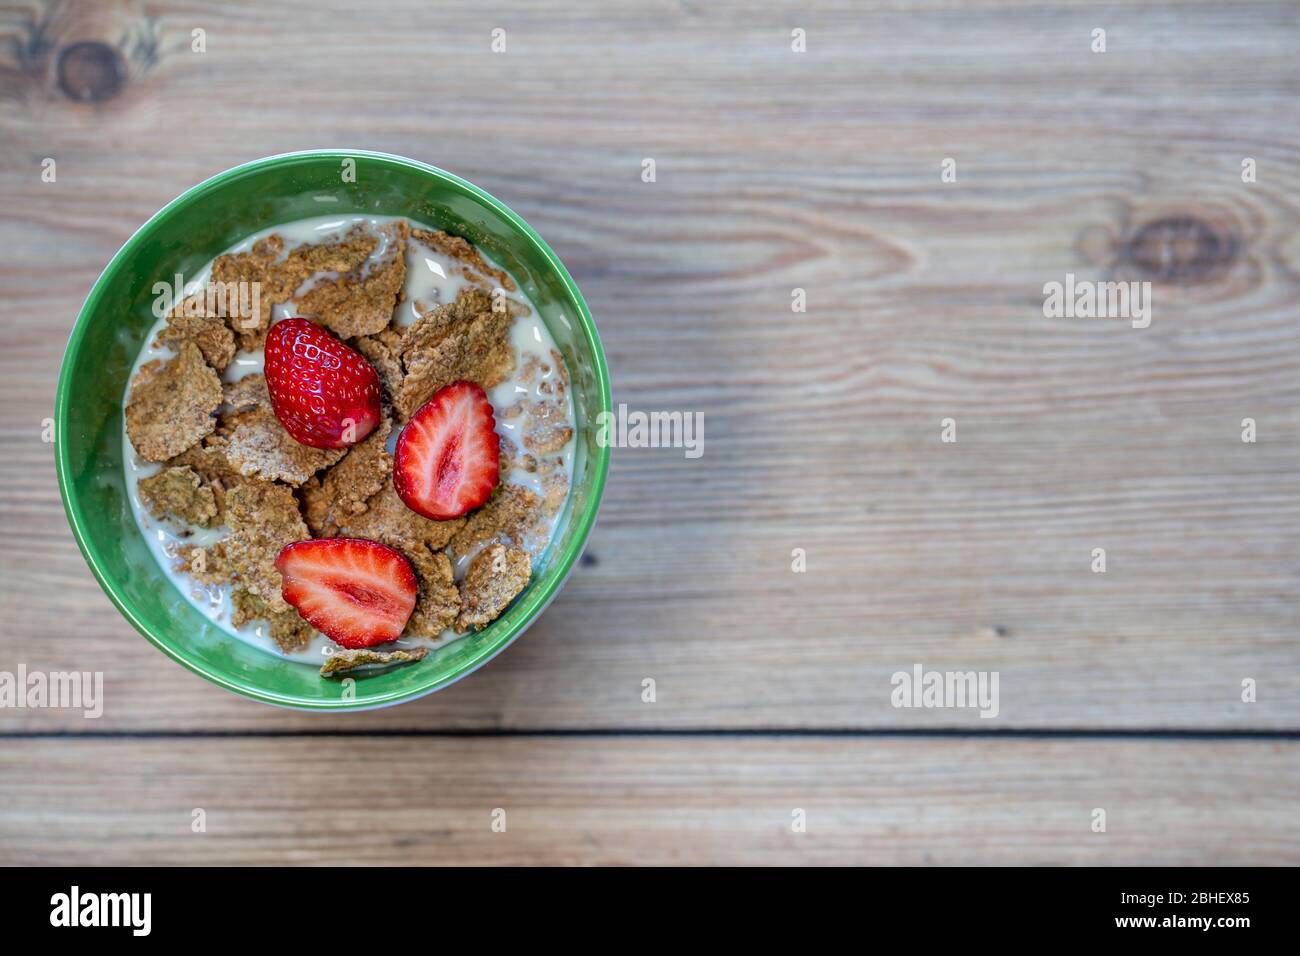 Top view of Healthy Whole-Grain Cereals Fitness meal. Milk, strawberries and Cereals breakfast. Green bowl on wooden kitchen table background Stock Photo